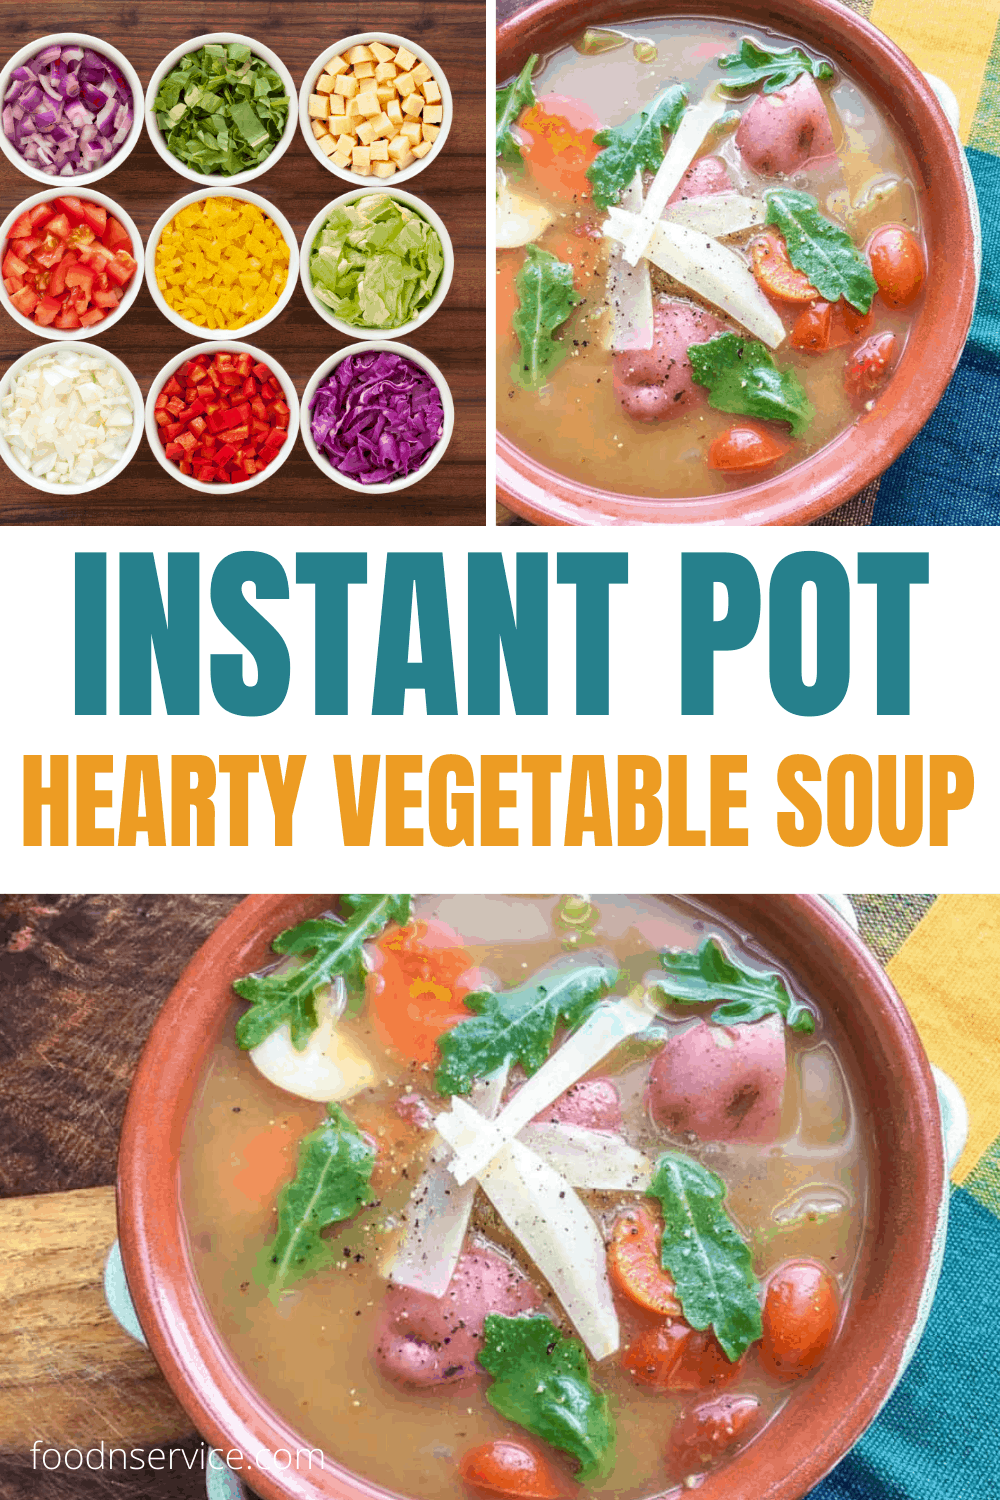 How to make Instant Pot Vegetable Soup